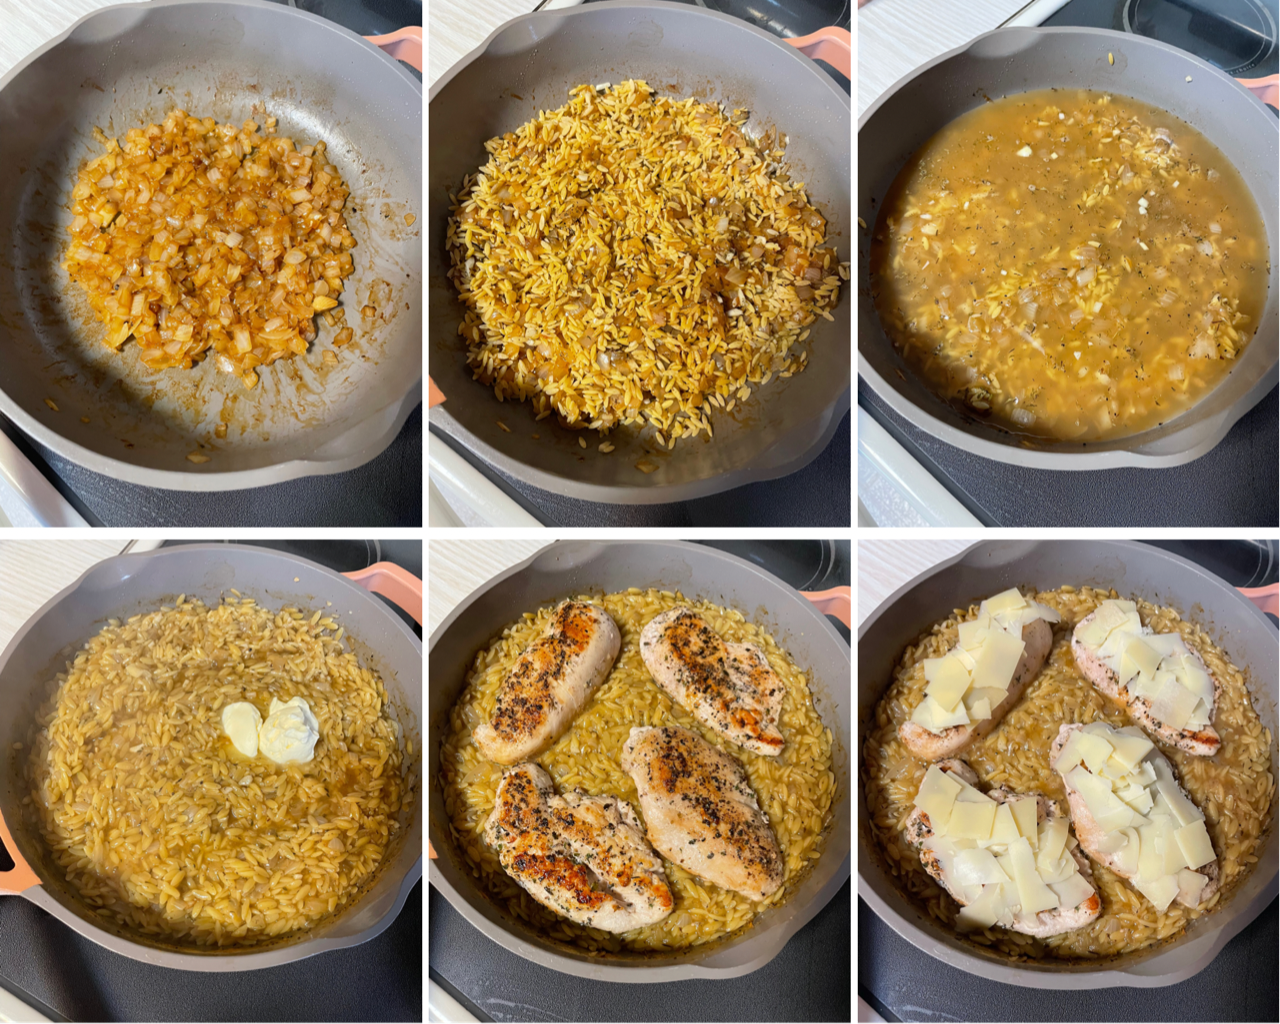 the process of caramelizing the onions, cooking the orzo, adding the chicken and cheese.